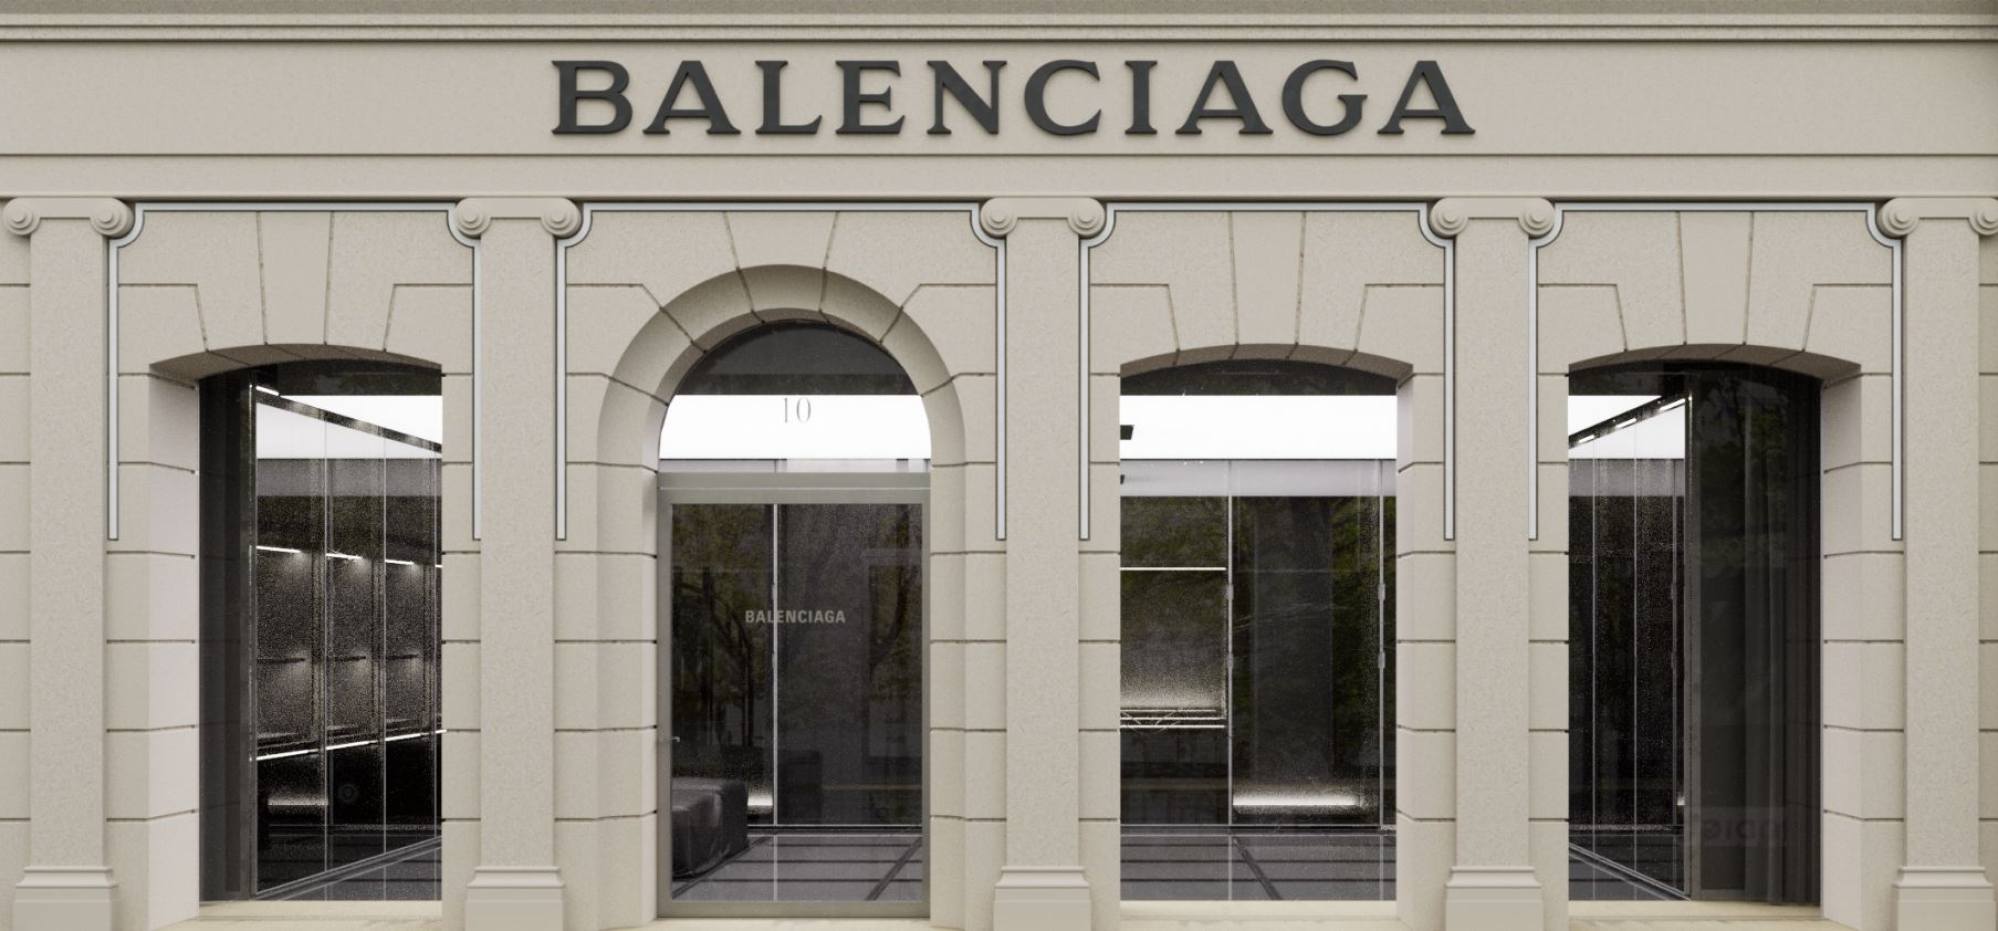 There's no apologizing for crimes against children”: Balenciaga